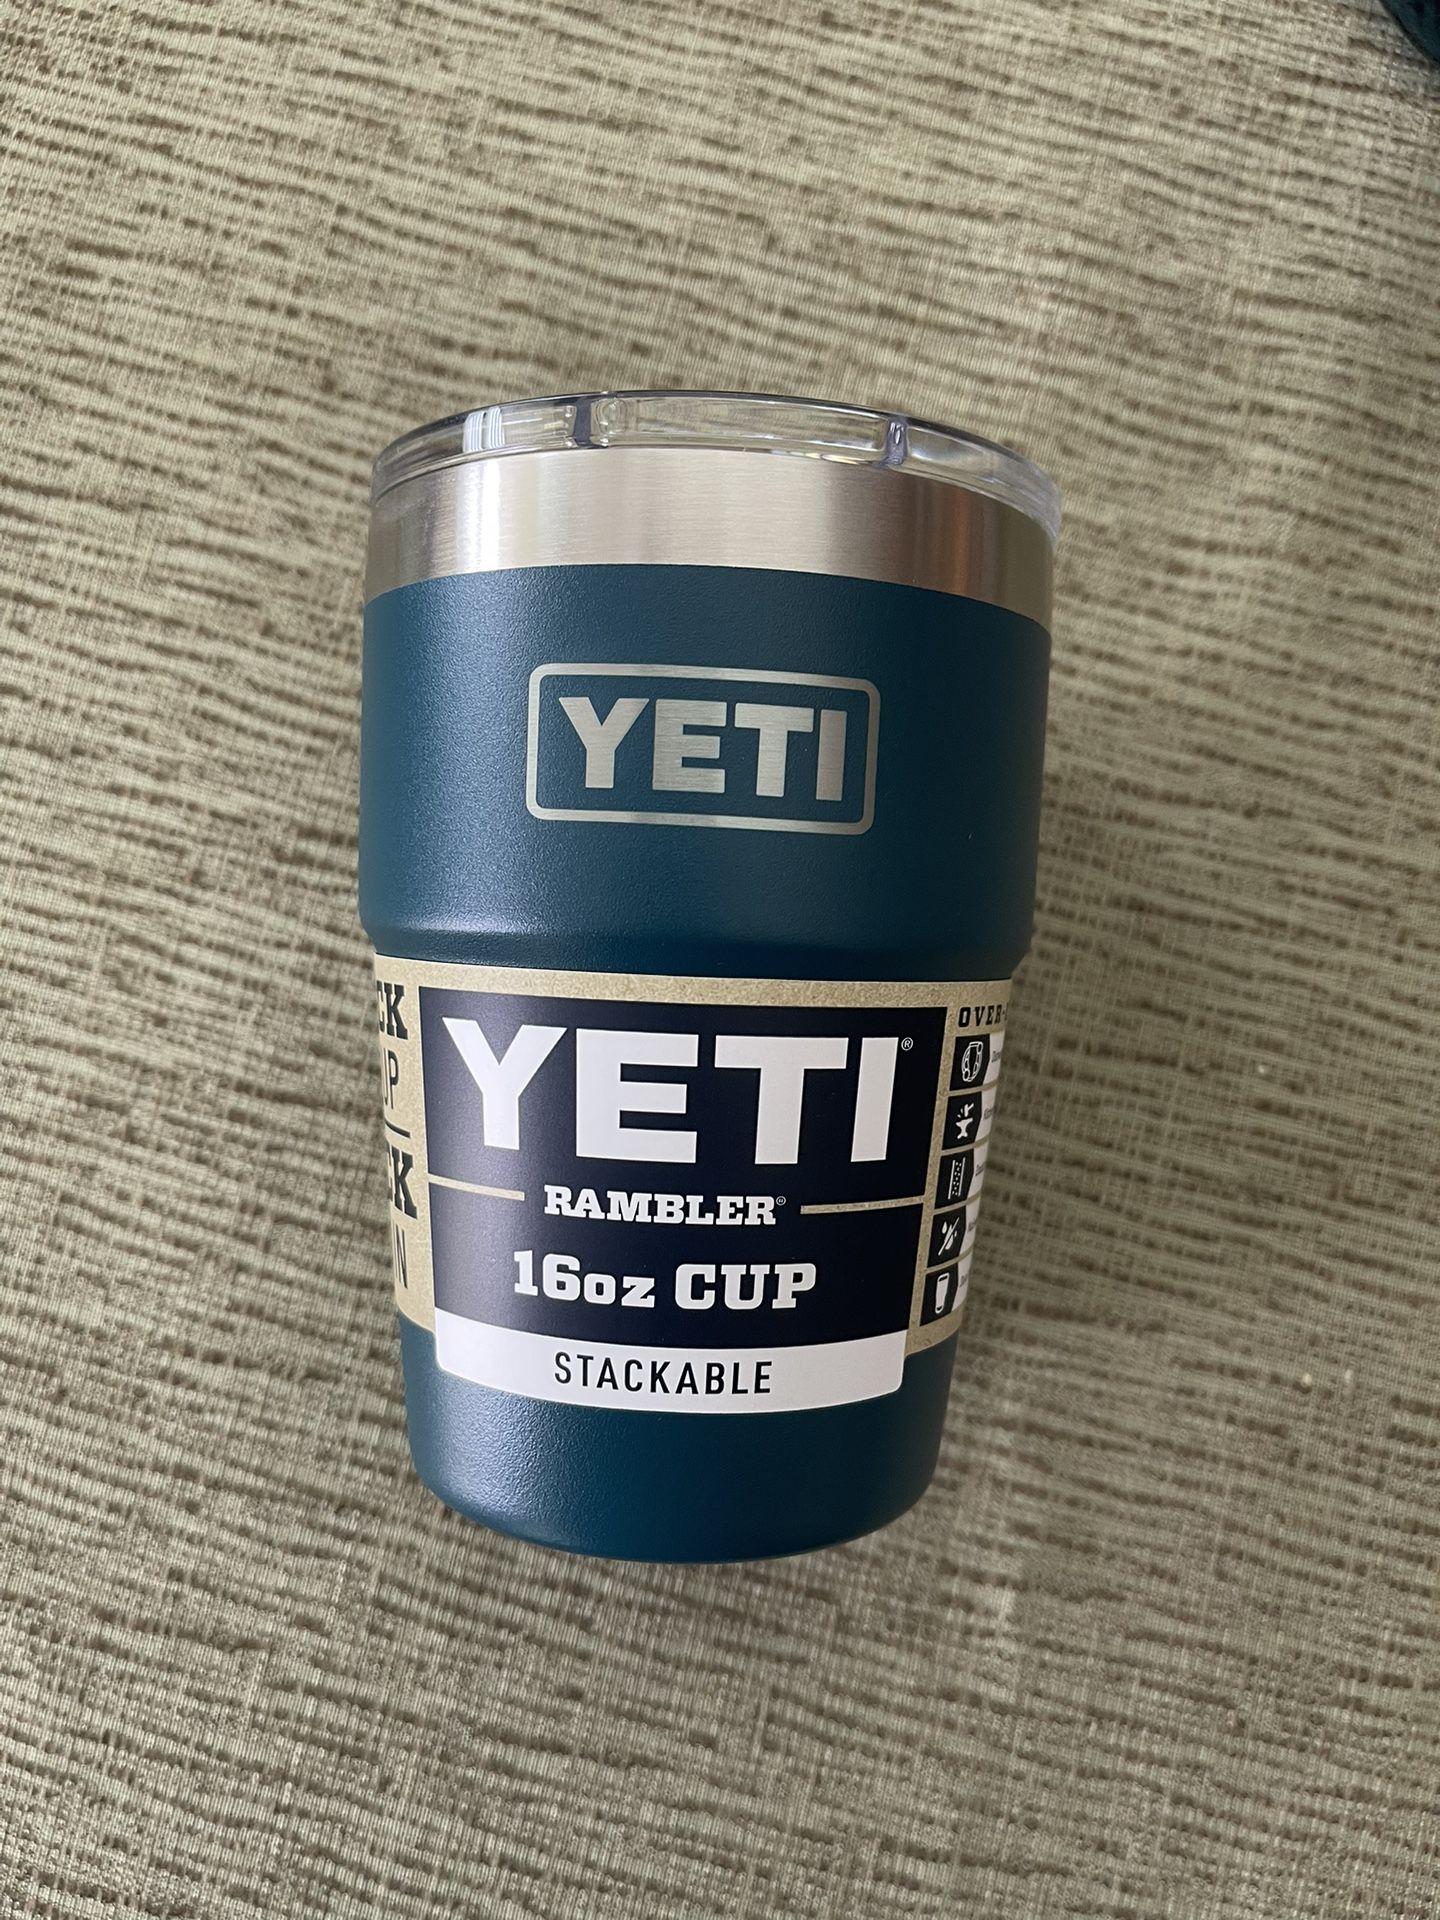 Yeti Rambler Stackable 16 Oz Cup- New